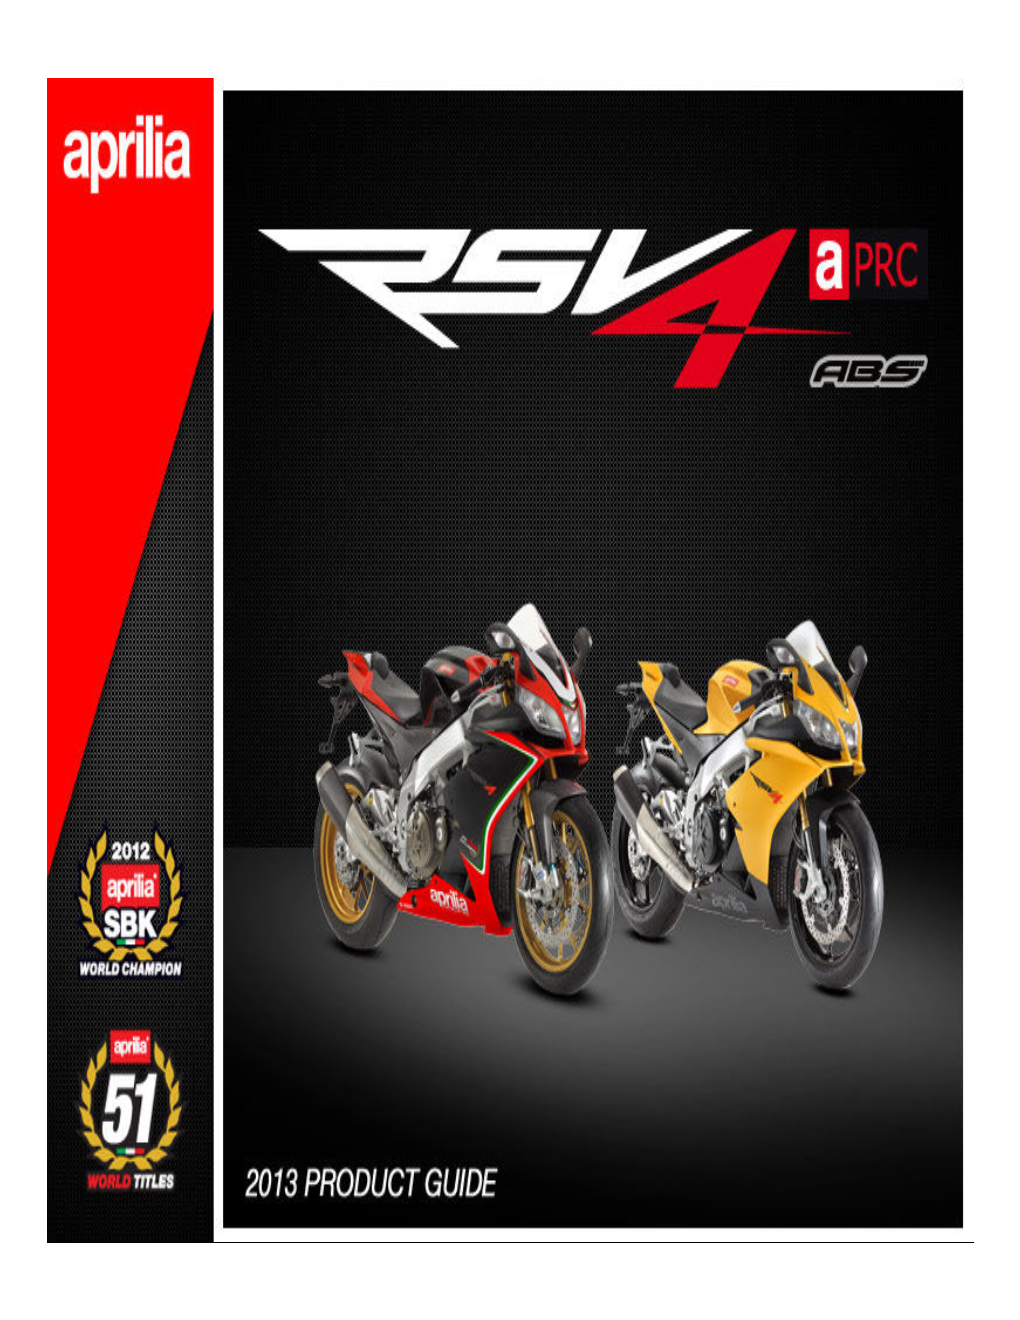 RSV4 FACTORY Aprc ABS Is the FASTEST, MOST POWERFUL and SAFEST RSV4 Ever Made